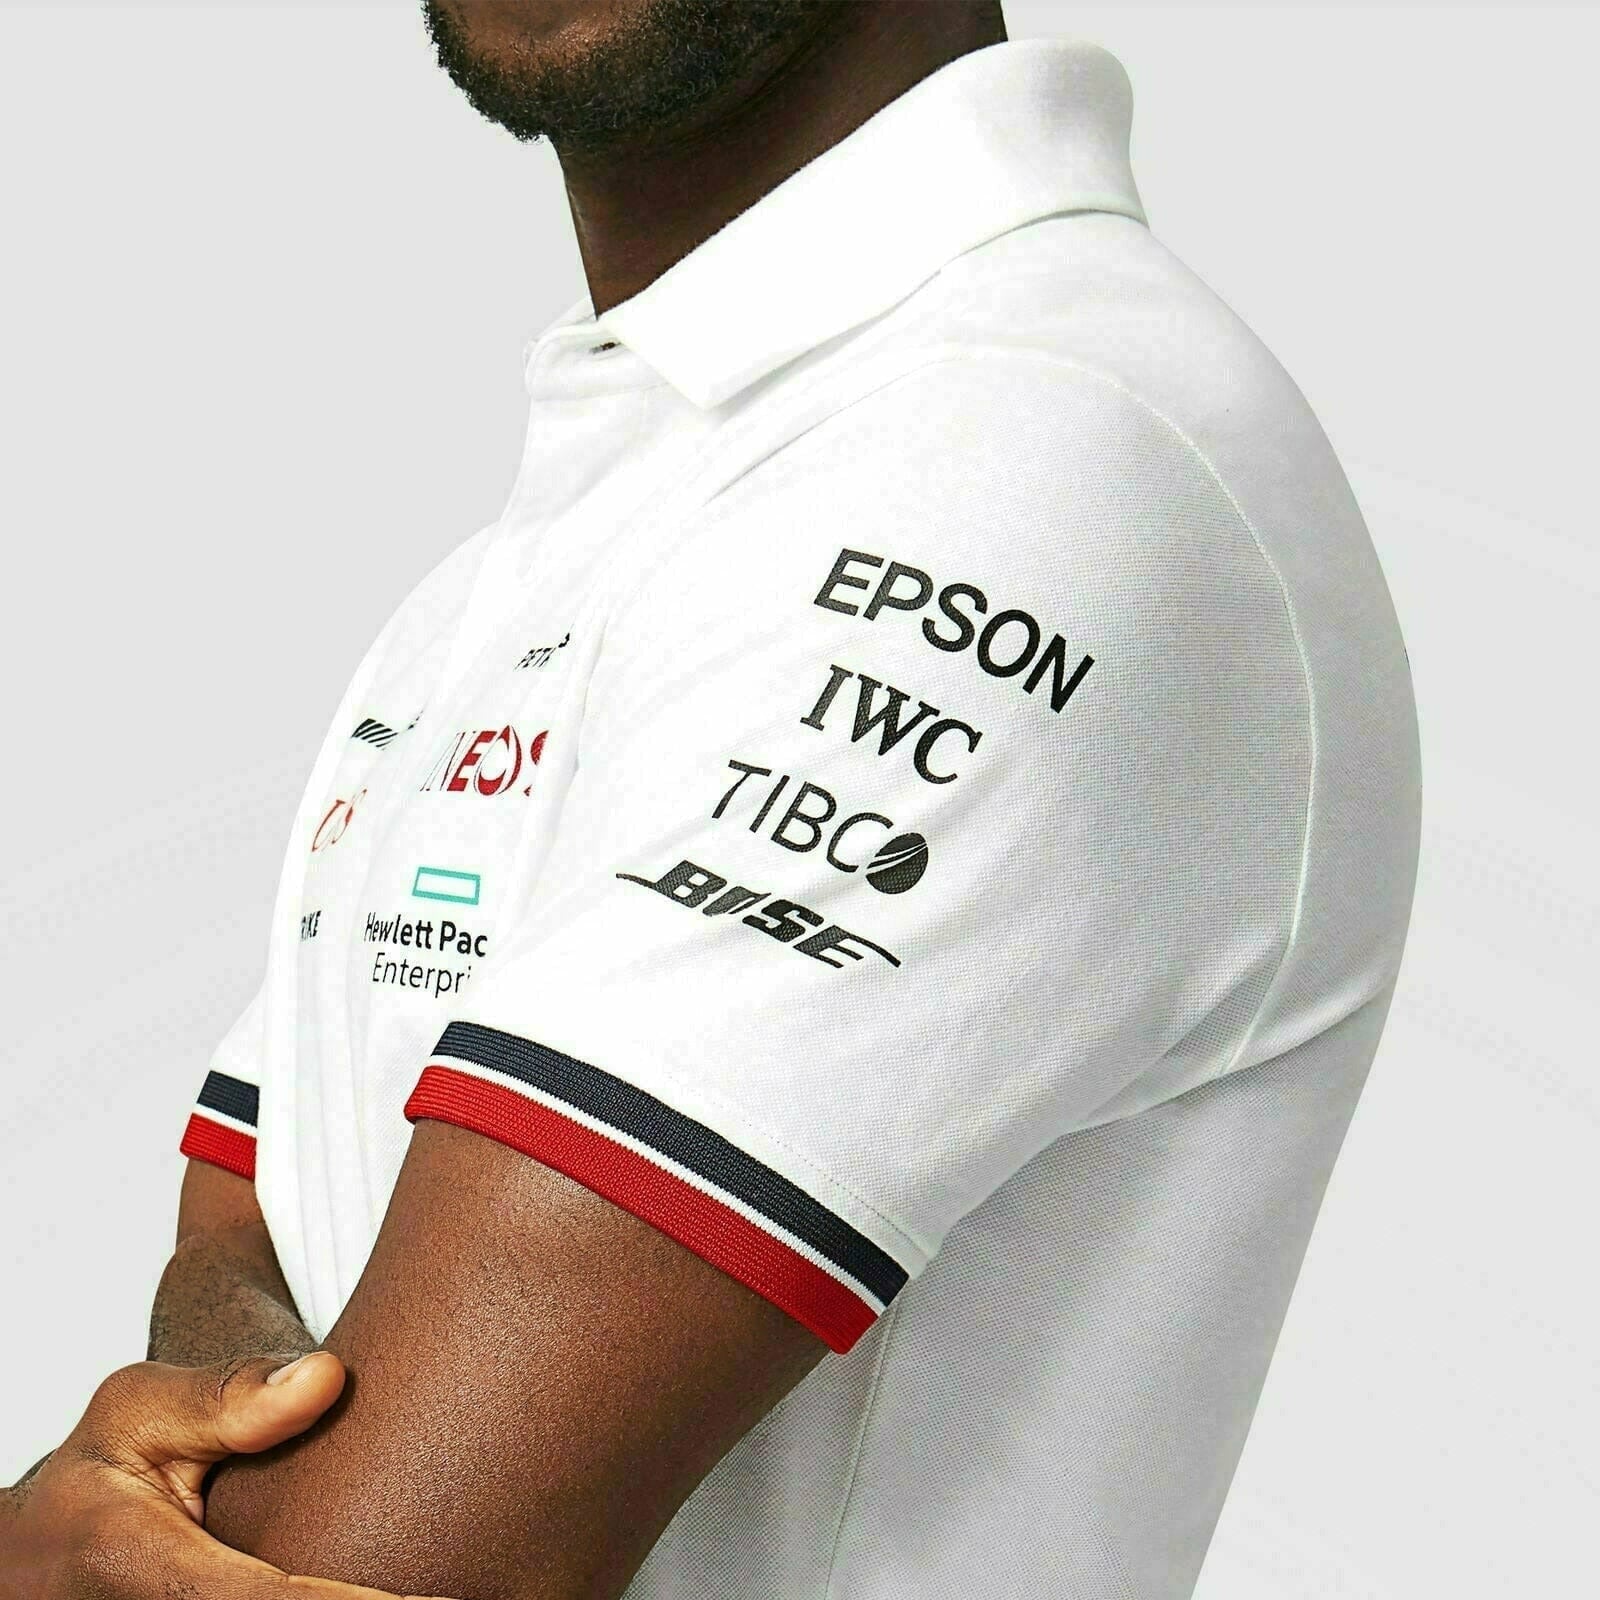 LIFESTYLE F1 Mercedes MAPM - Polo Homme white - Private Sport Shop